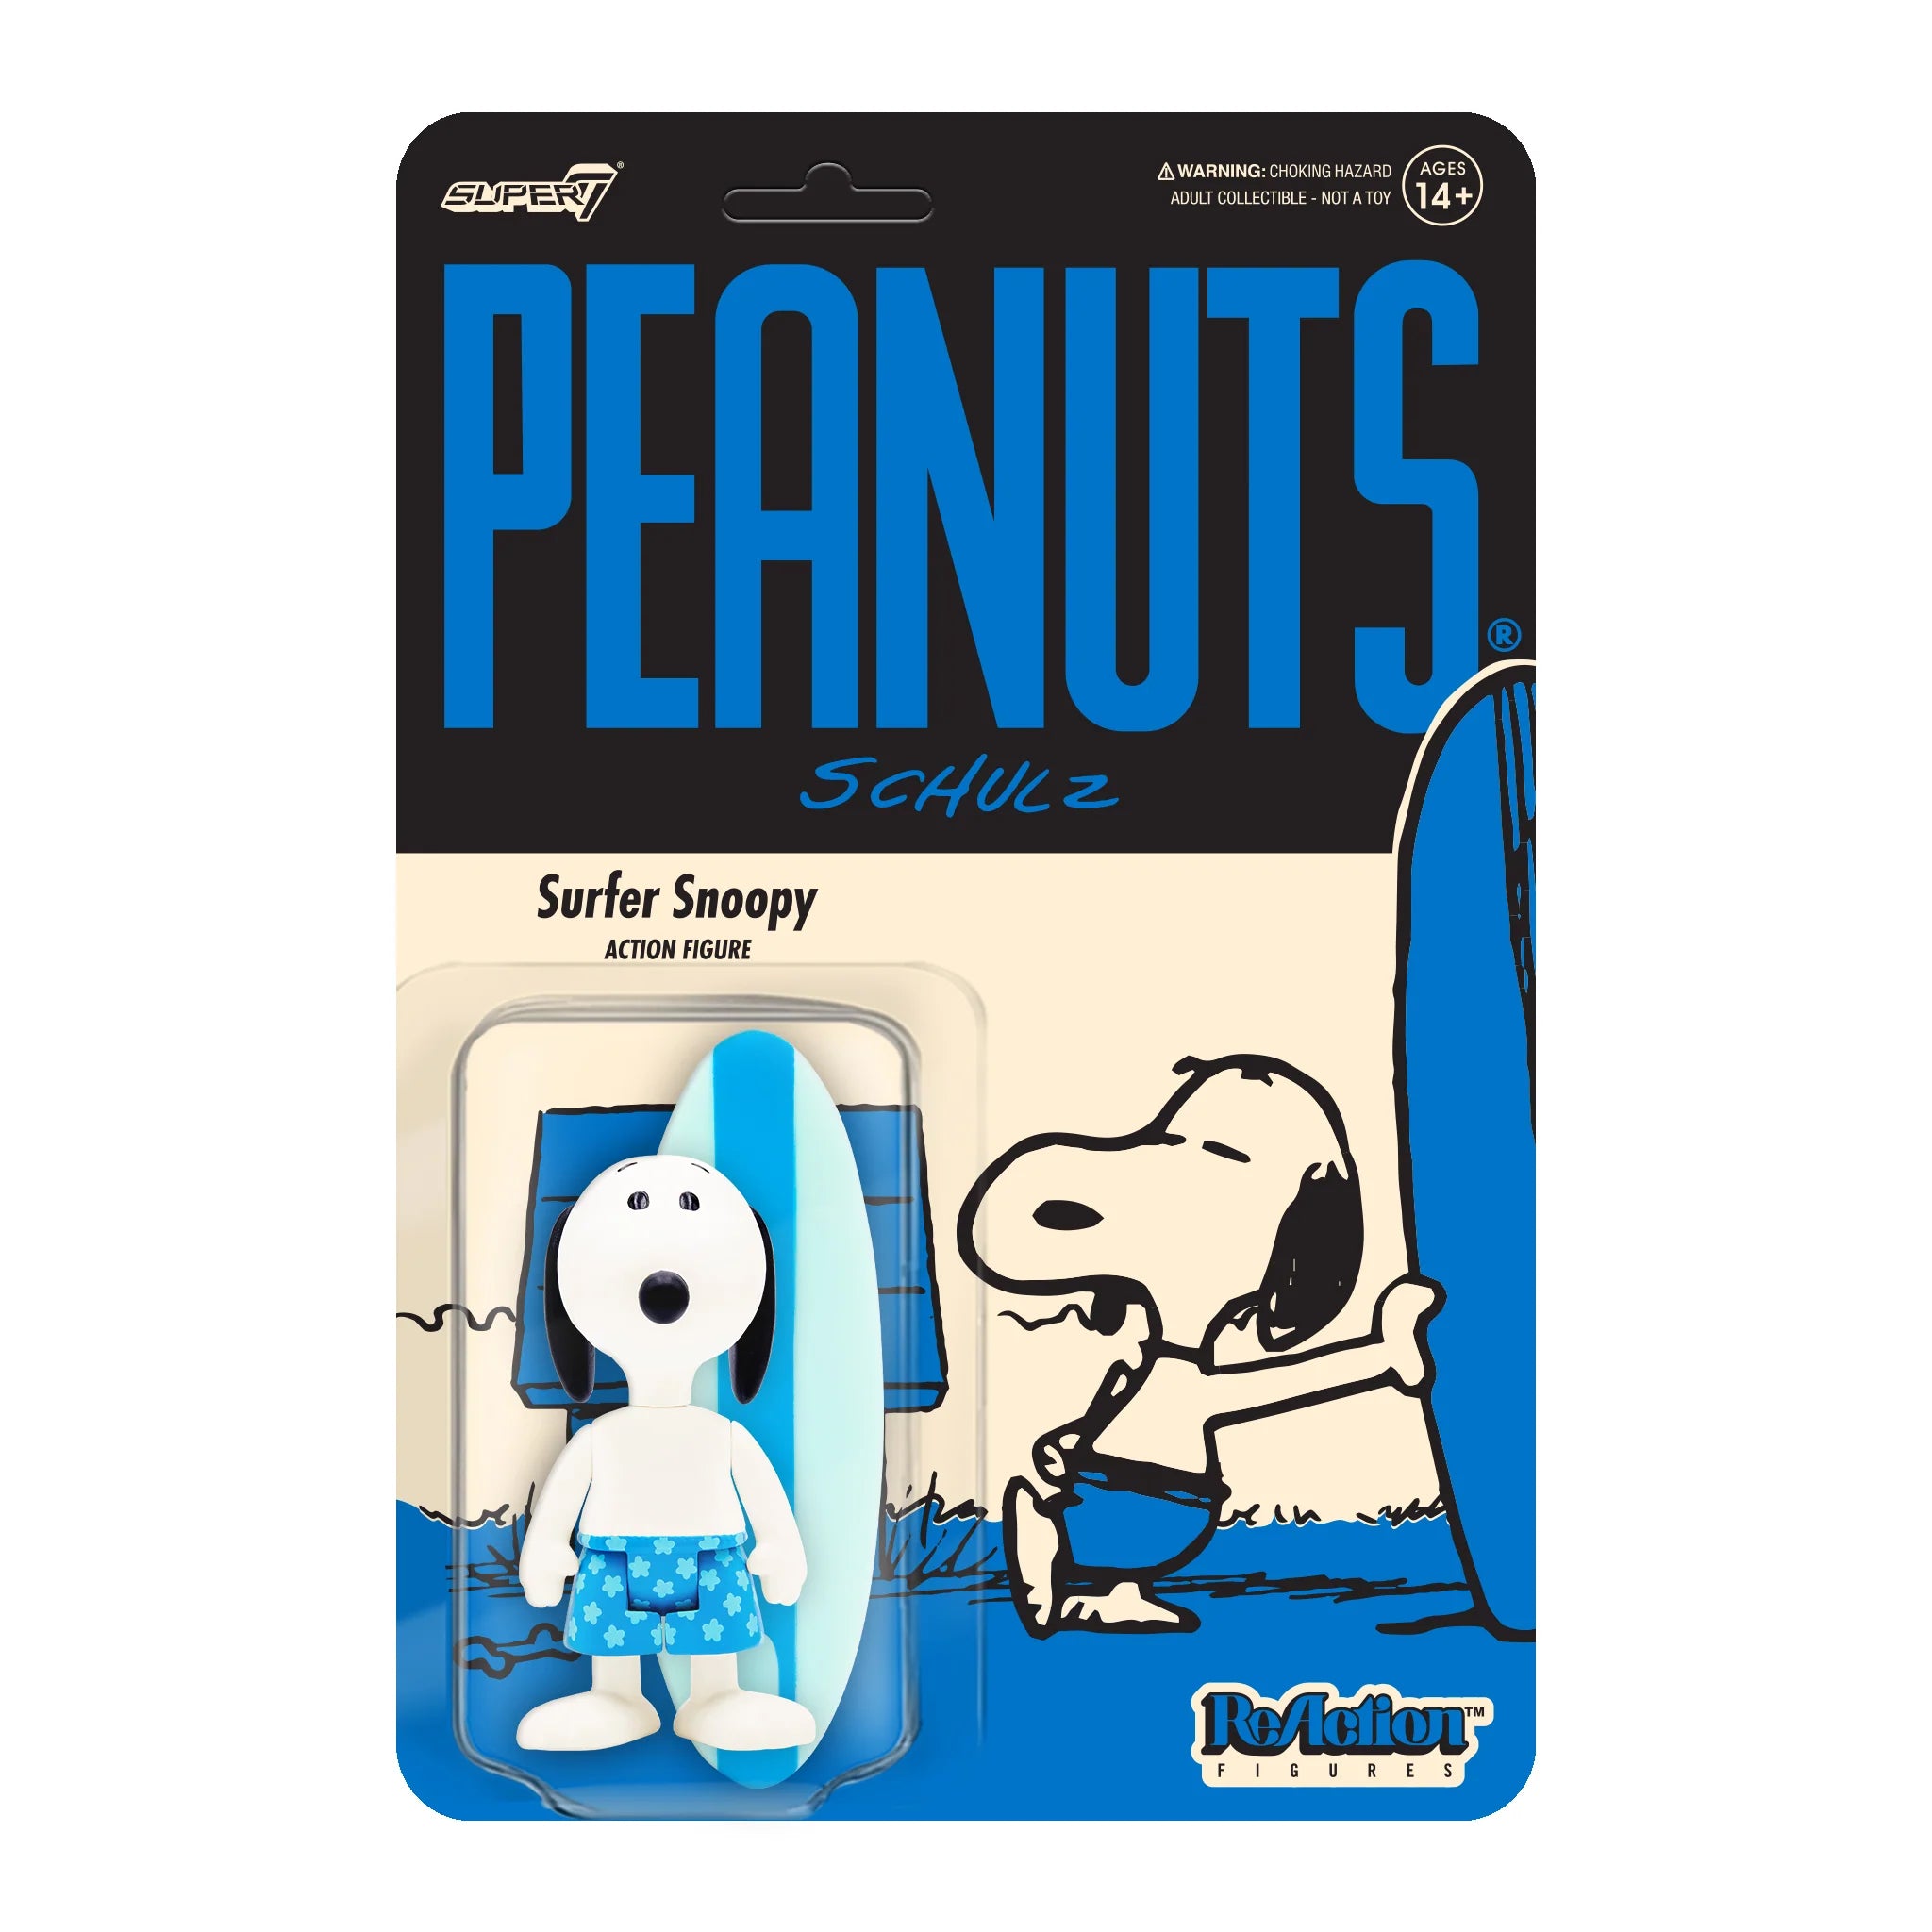 Peanuts ReAction - Surfer Snoopy